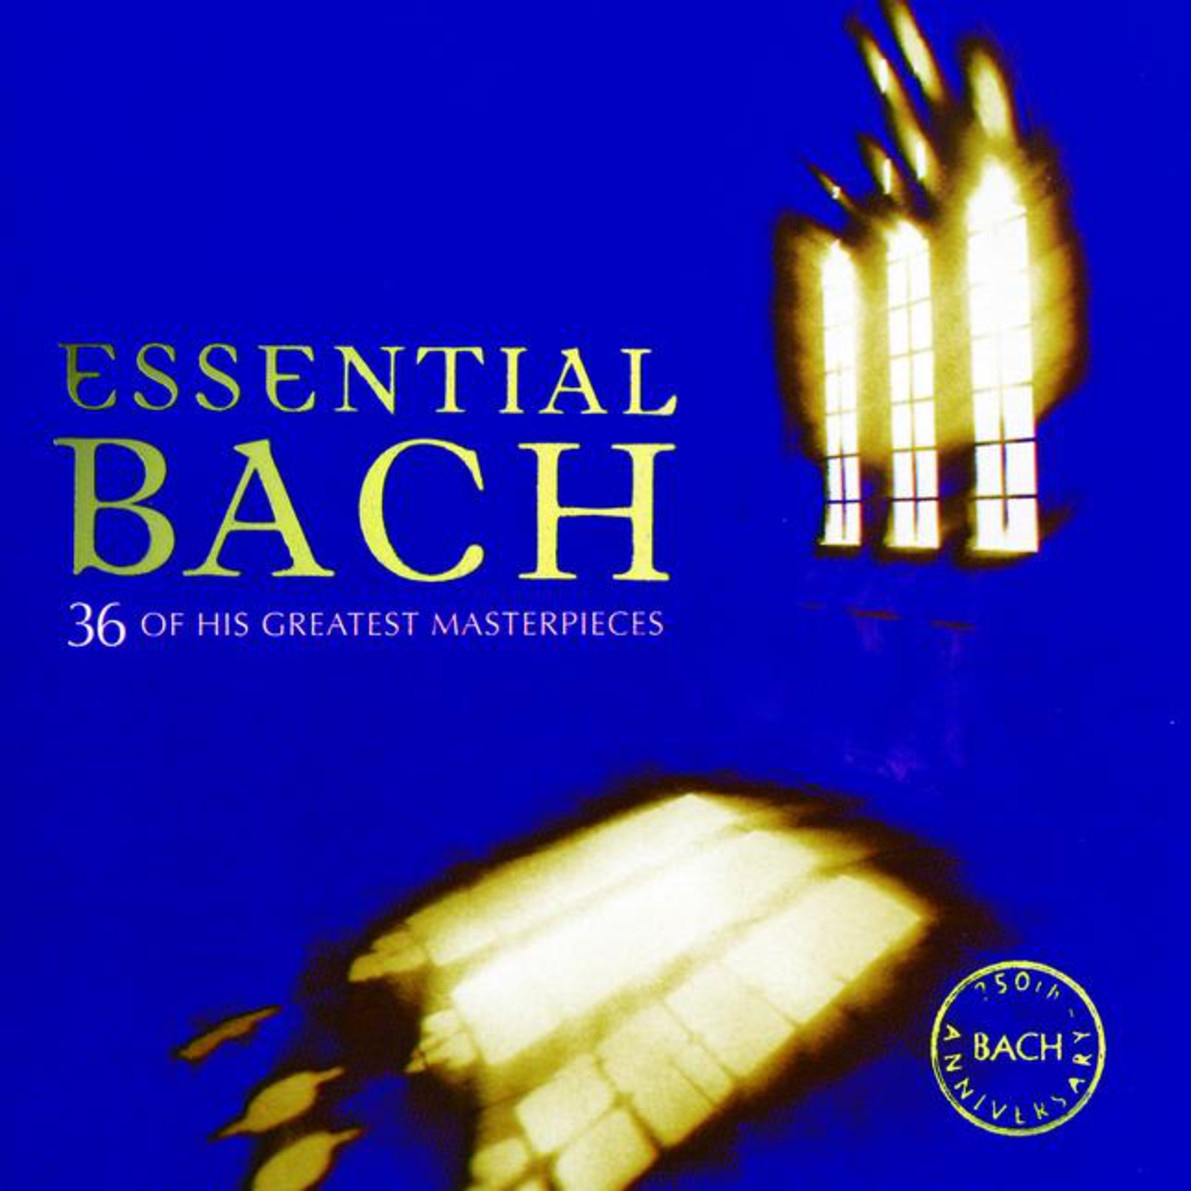 Bist du bei mir (attrib. J. S. Bach BWV508) (from the notebook of Anna Magdalena Bach)